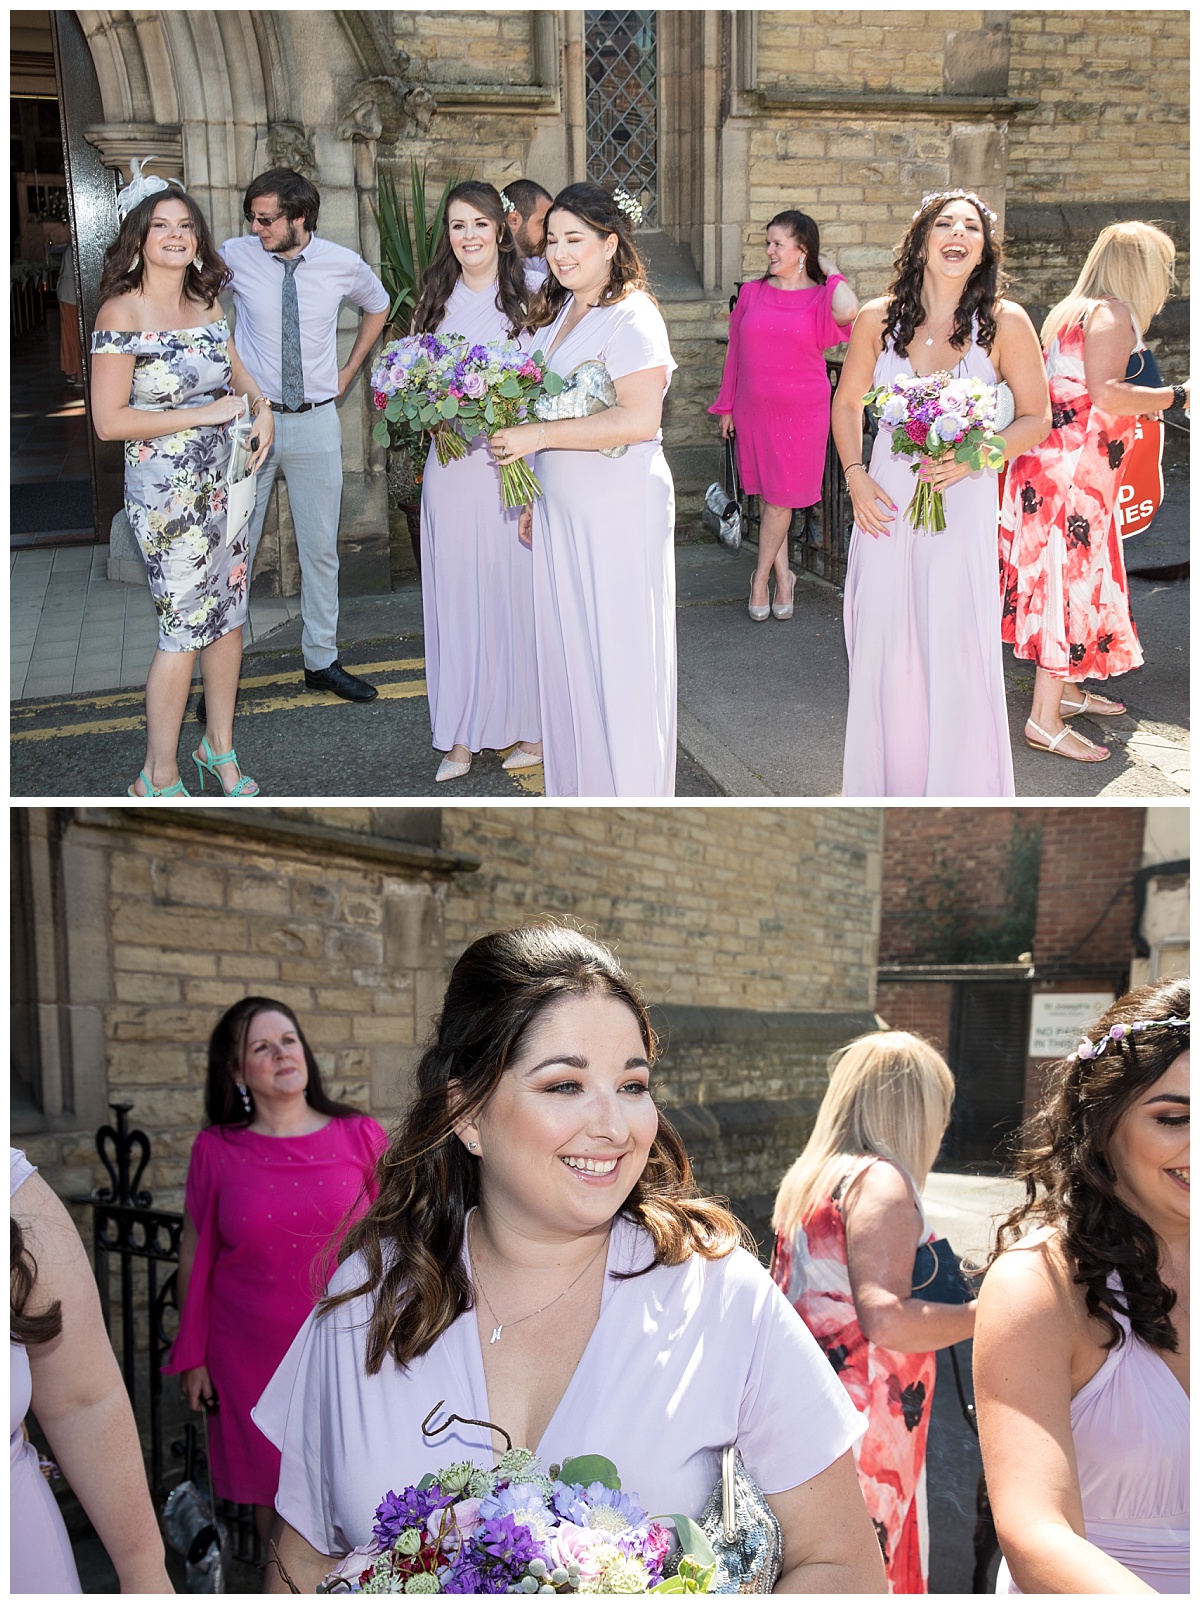 Wedding Photography Manchester - Lauren and Colyn's Wizard Wedding 18